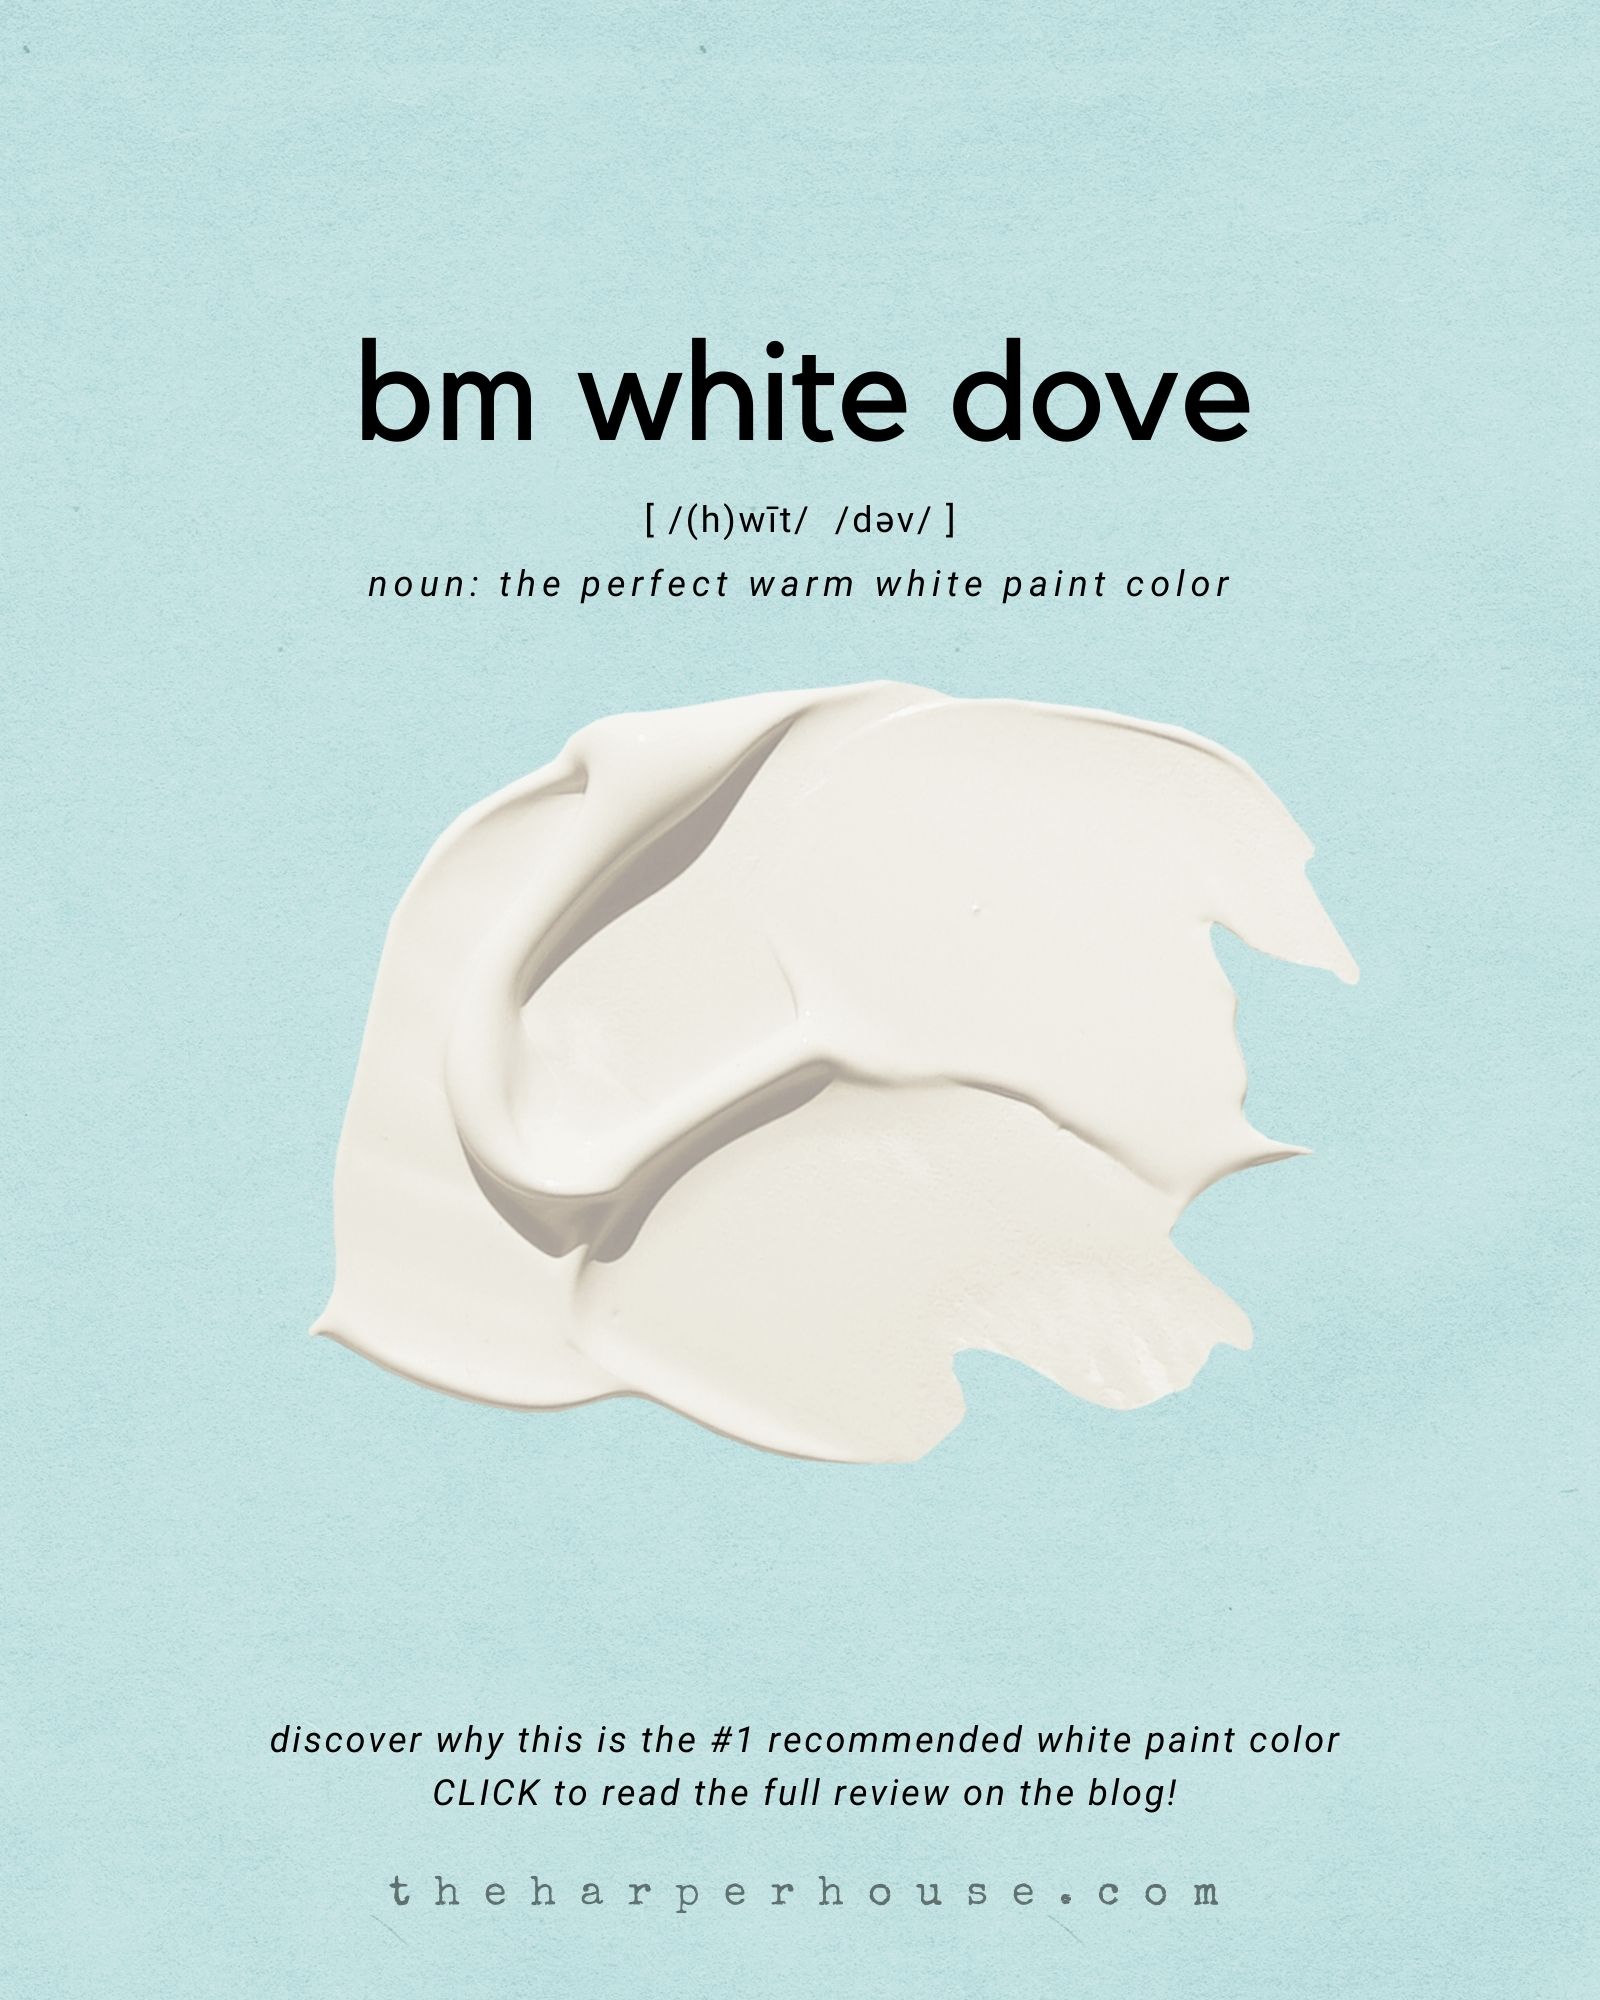 The Best Warm White Paint Colors, According to Designers